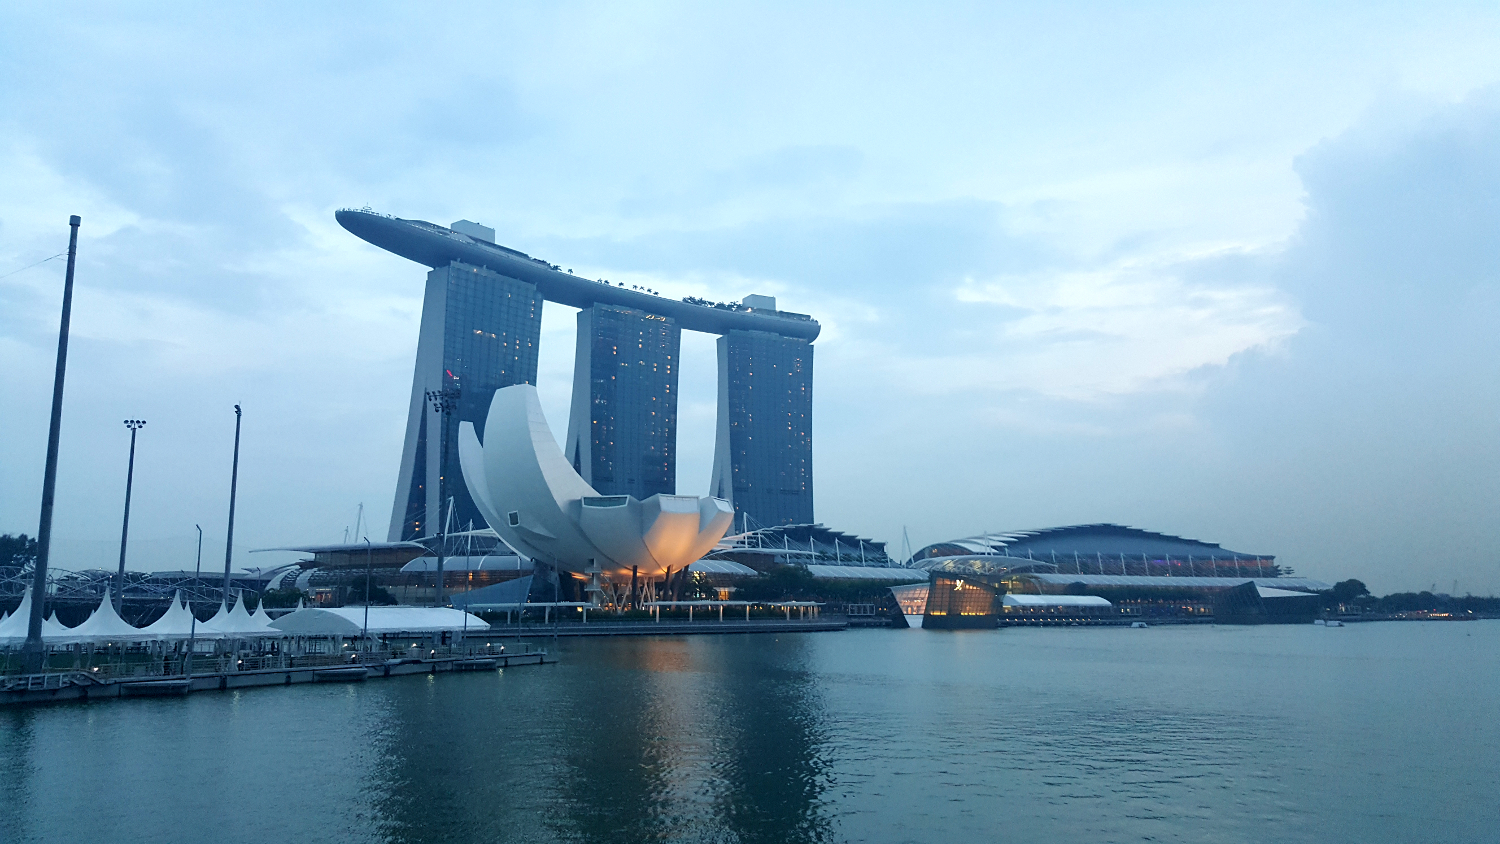 The Marina Bay Sands and Art Science Museum are two of the top places to visit in Singapore. Read this guide to Singapore and find out what to see in Singapore, food in Singapore, and tips for Singapore. #Singapore #singaporeguide #singaporetraveling #singaporetravel #asiatravel #singaporetravelguide #travelguide #singaporetips